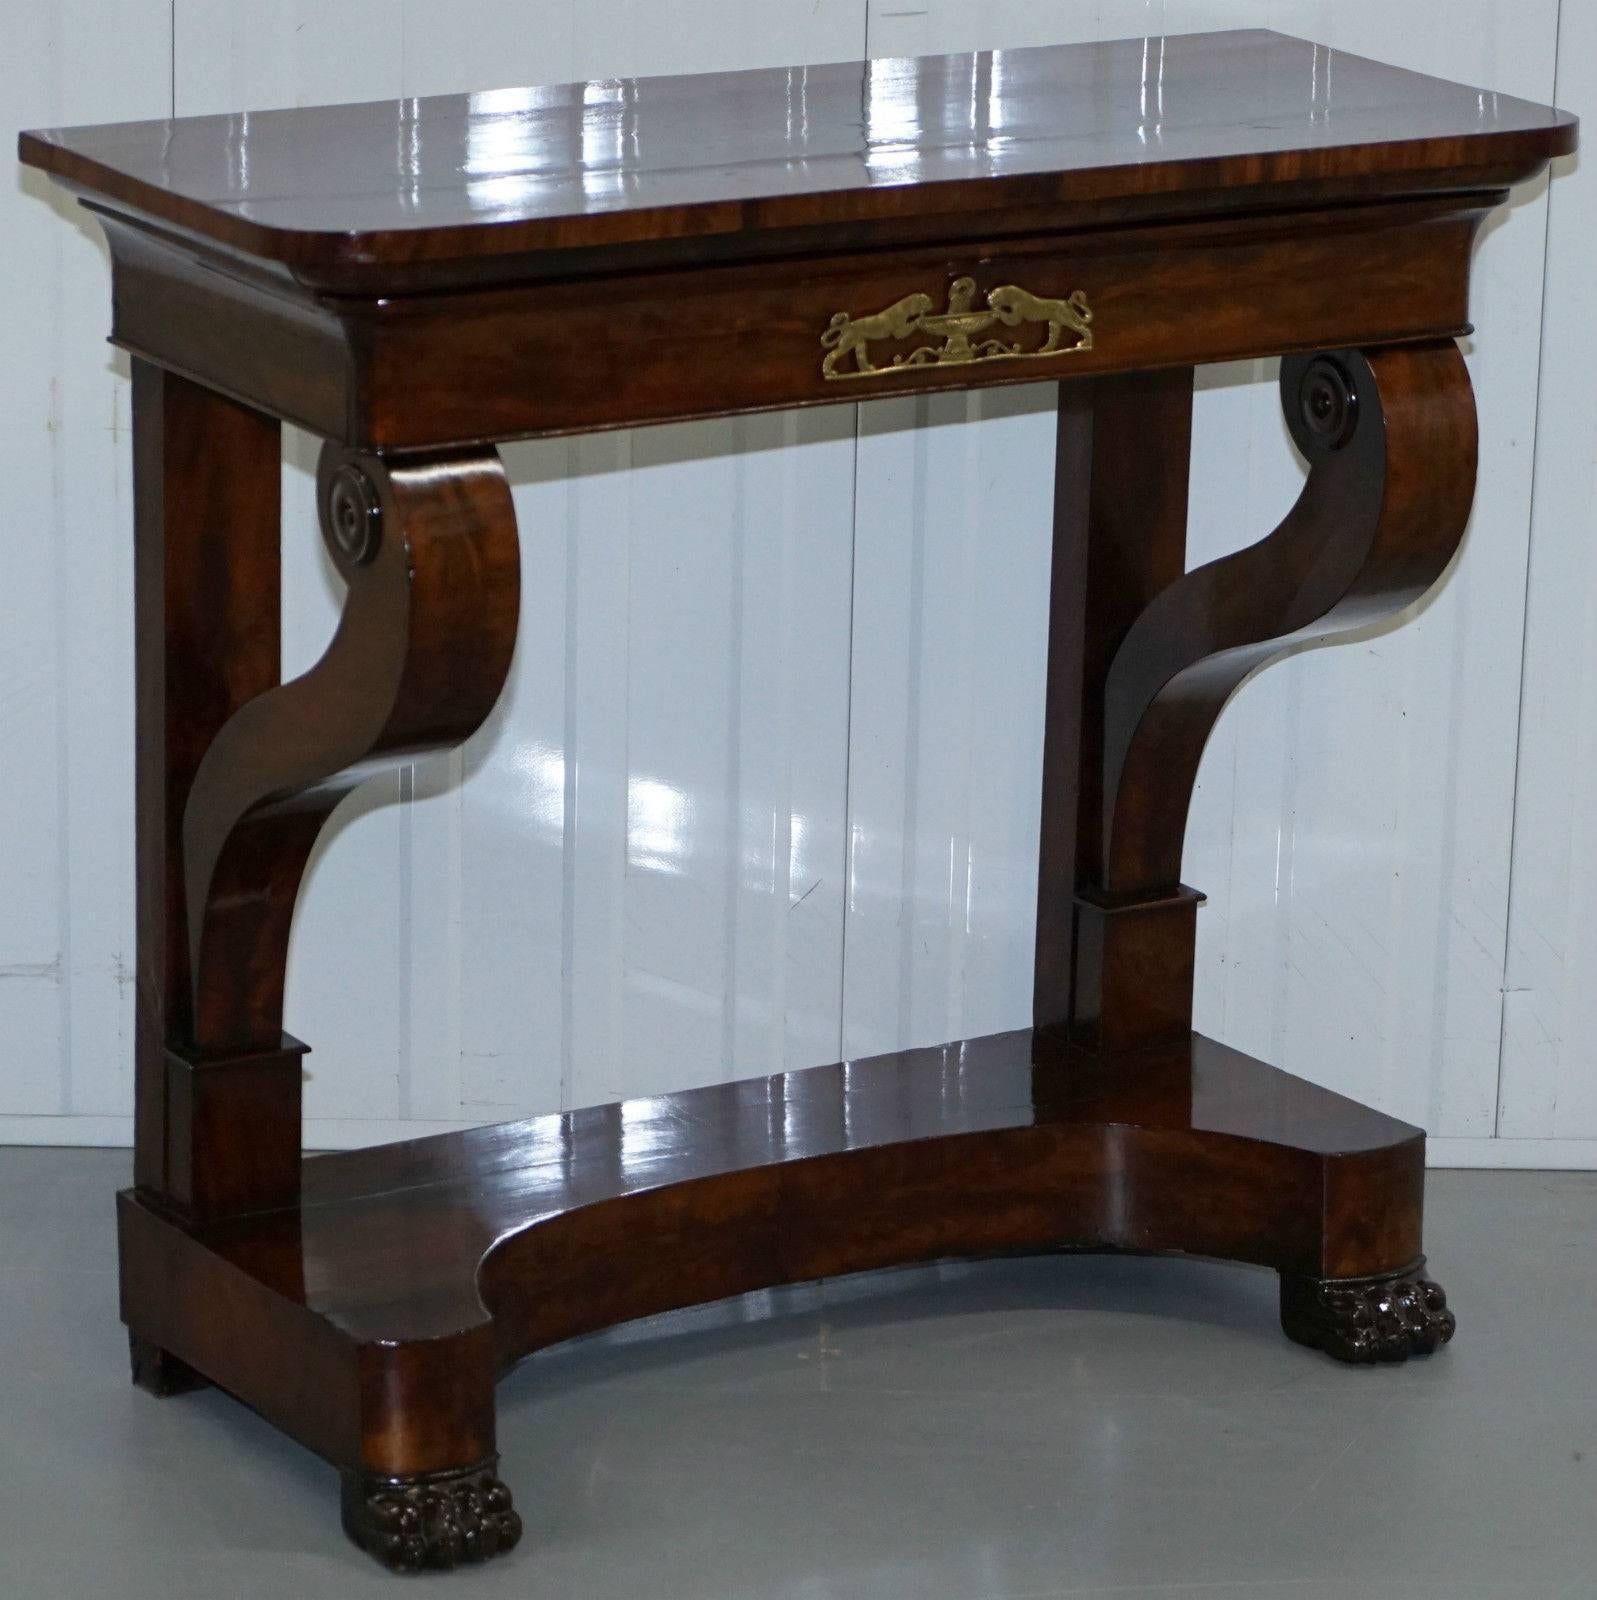 Hand-Carved Restored Original Stamped James Winter & Sons circa 1840 Mahogany Console Table